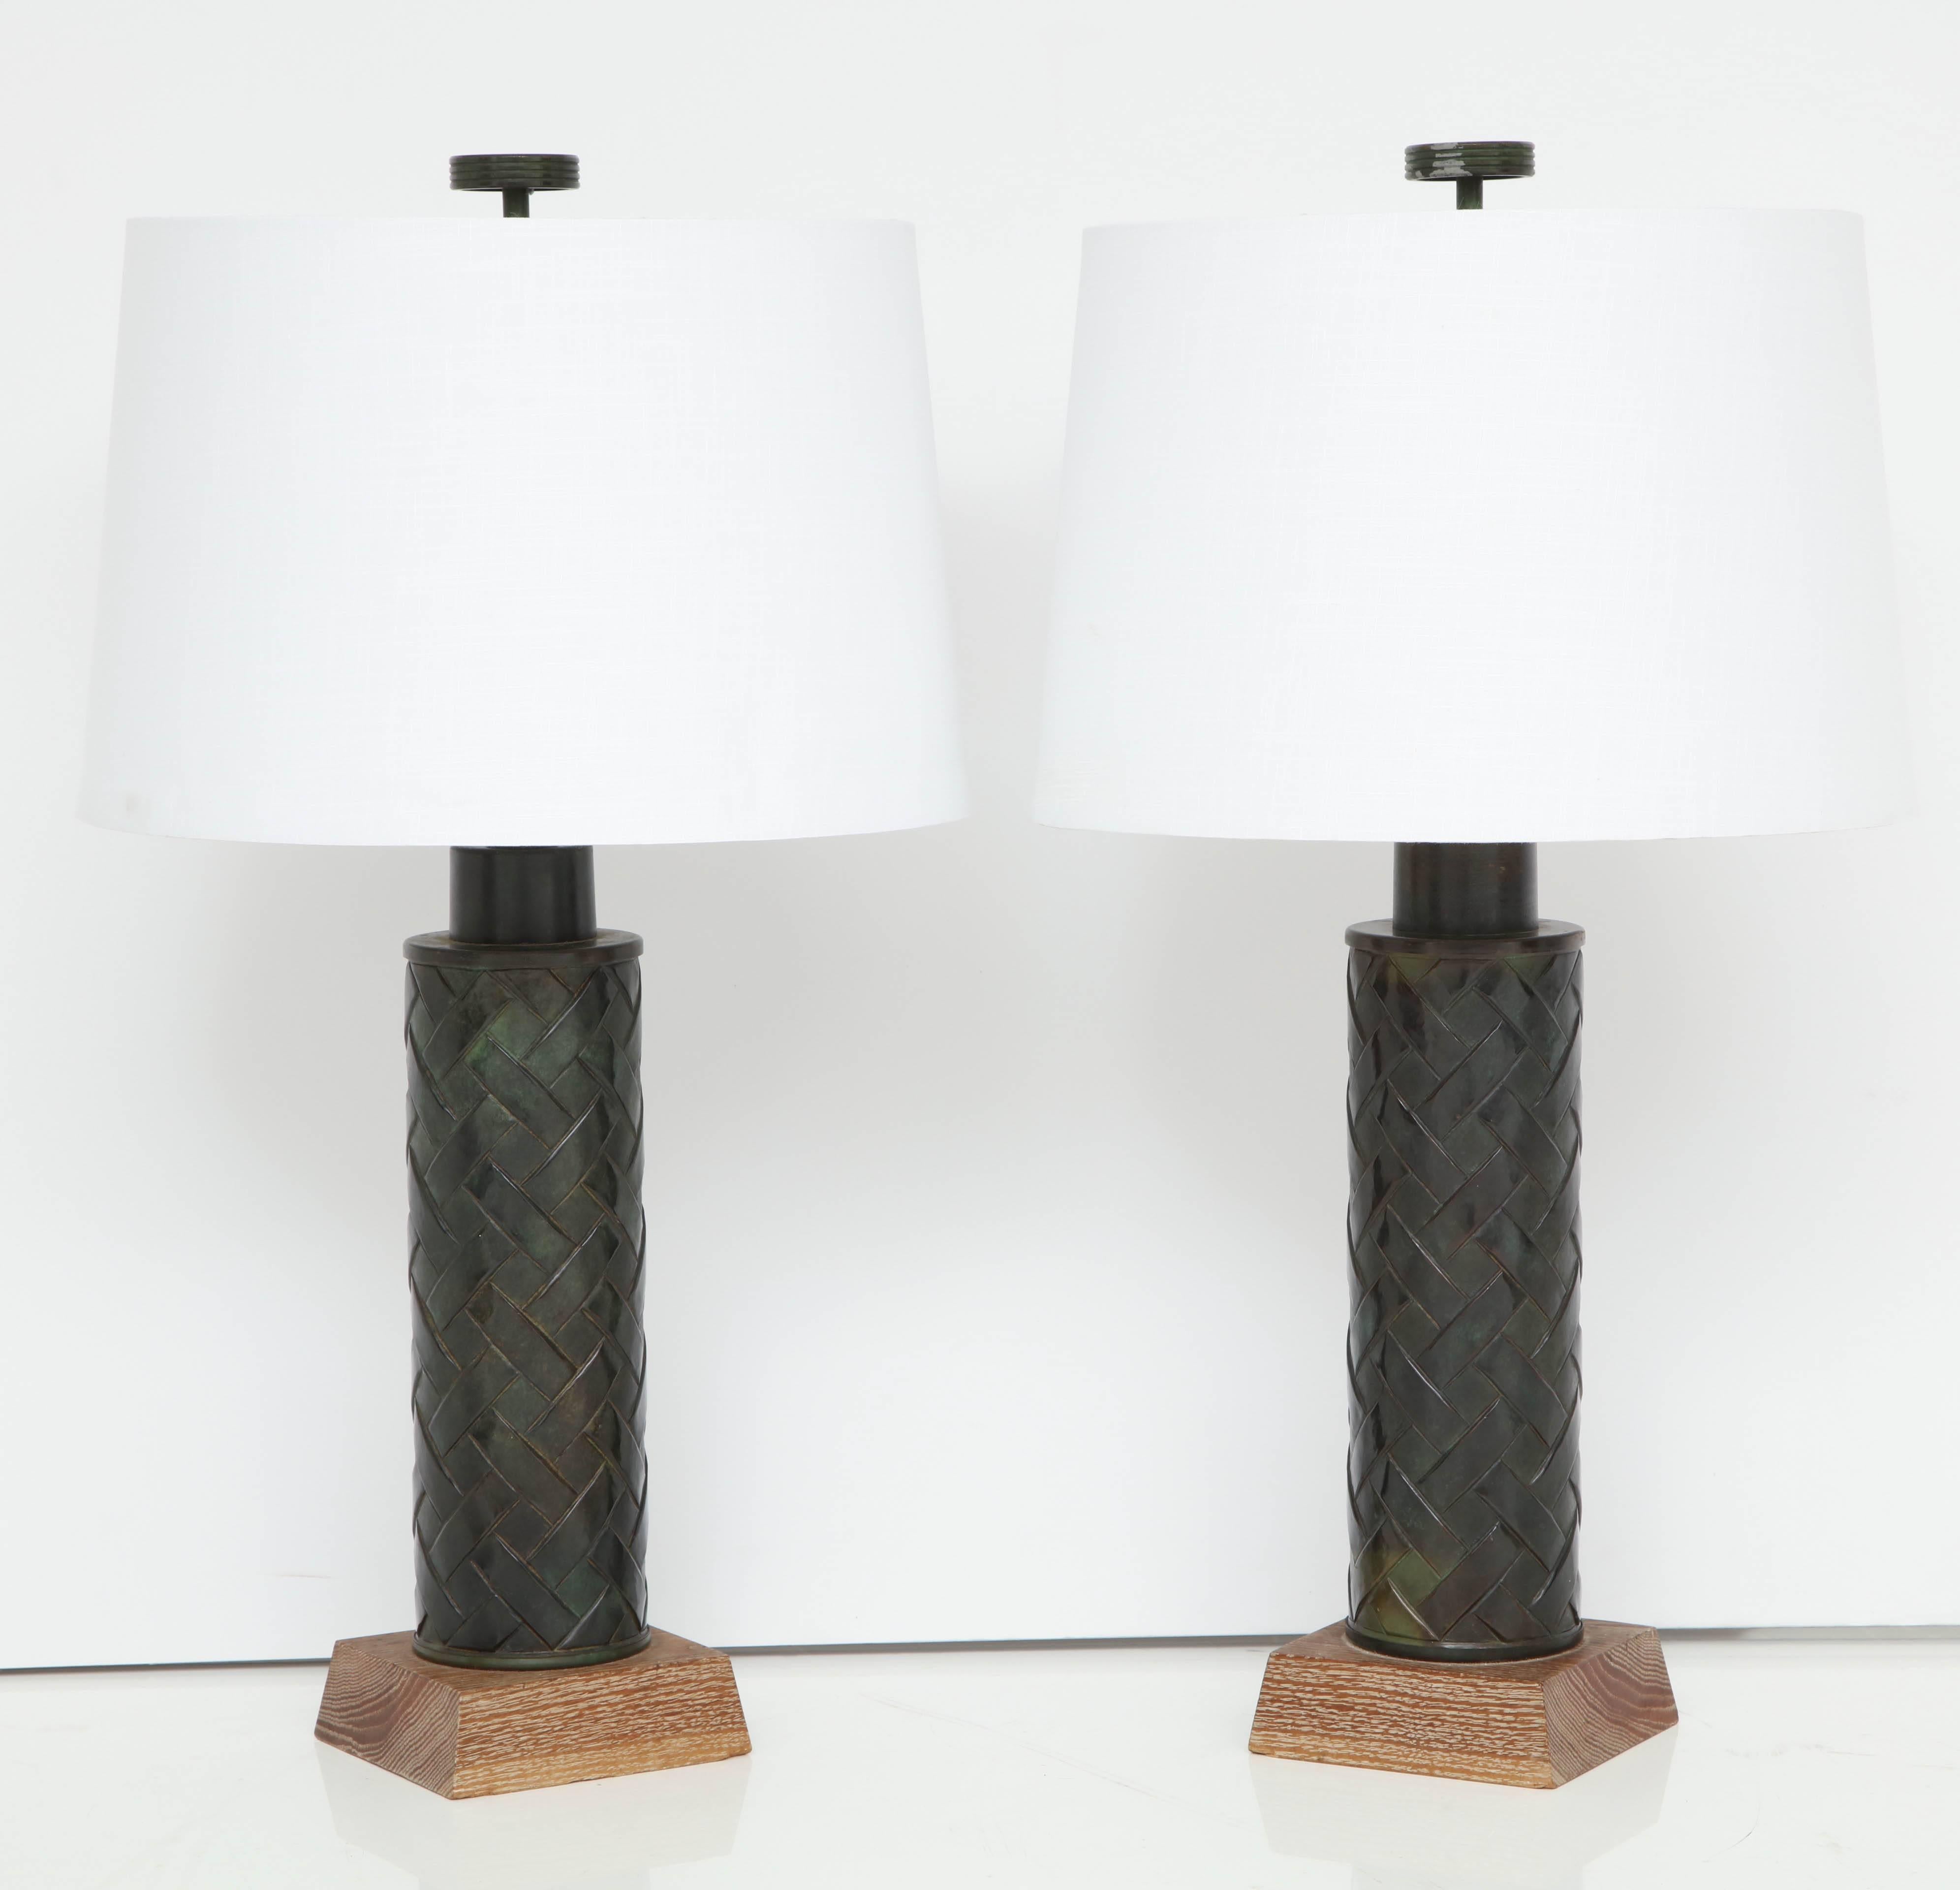 Fantastic pair of bronze lamps on oak bases, of note is the pattern on the bronze bases that reminds of the 